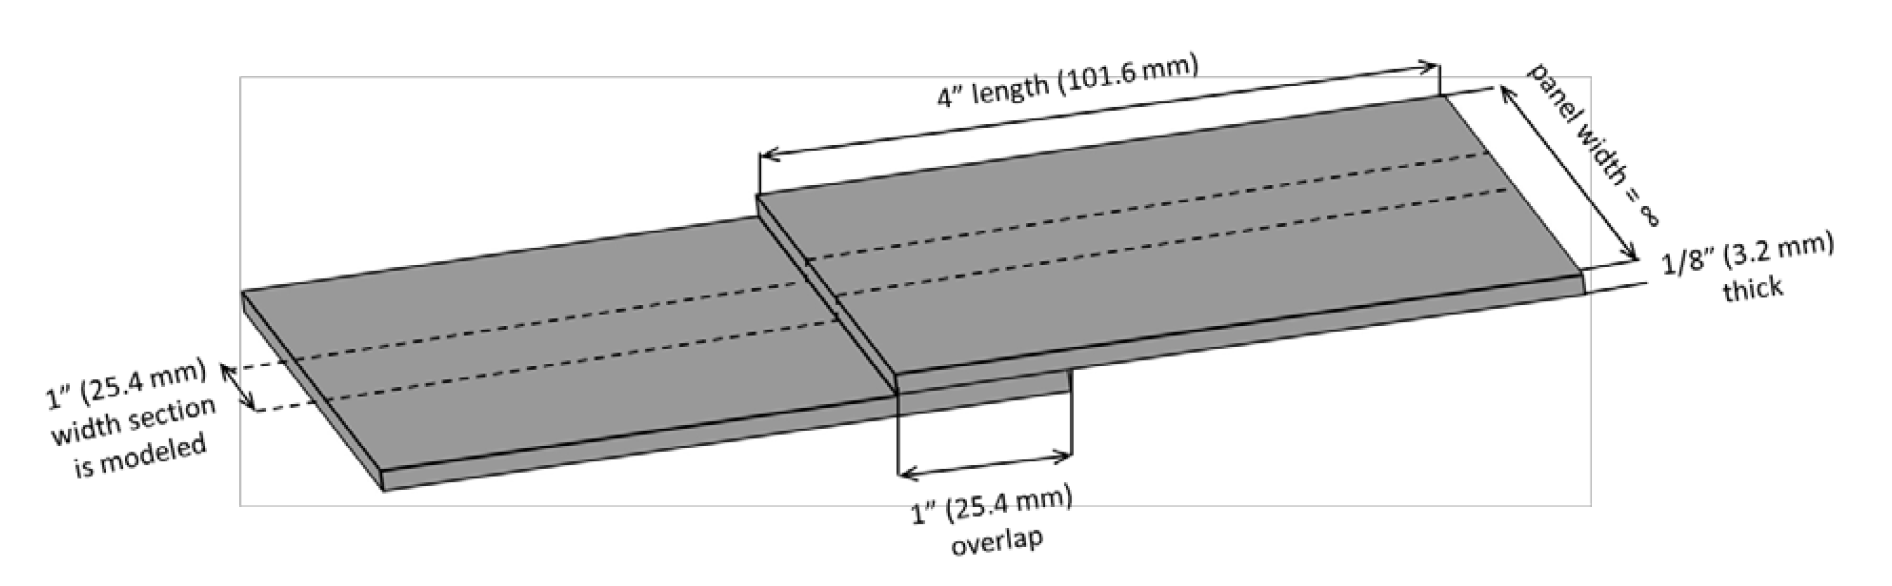 Fluxtrol - Induction Process and Coil Design for Welding of Carbon Fiber Reinforced Thermoplastics - Figure 1: Dimensions of test specimen used in FEA.